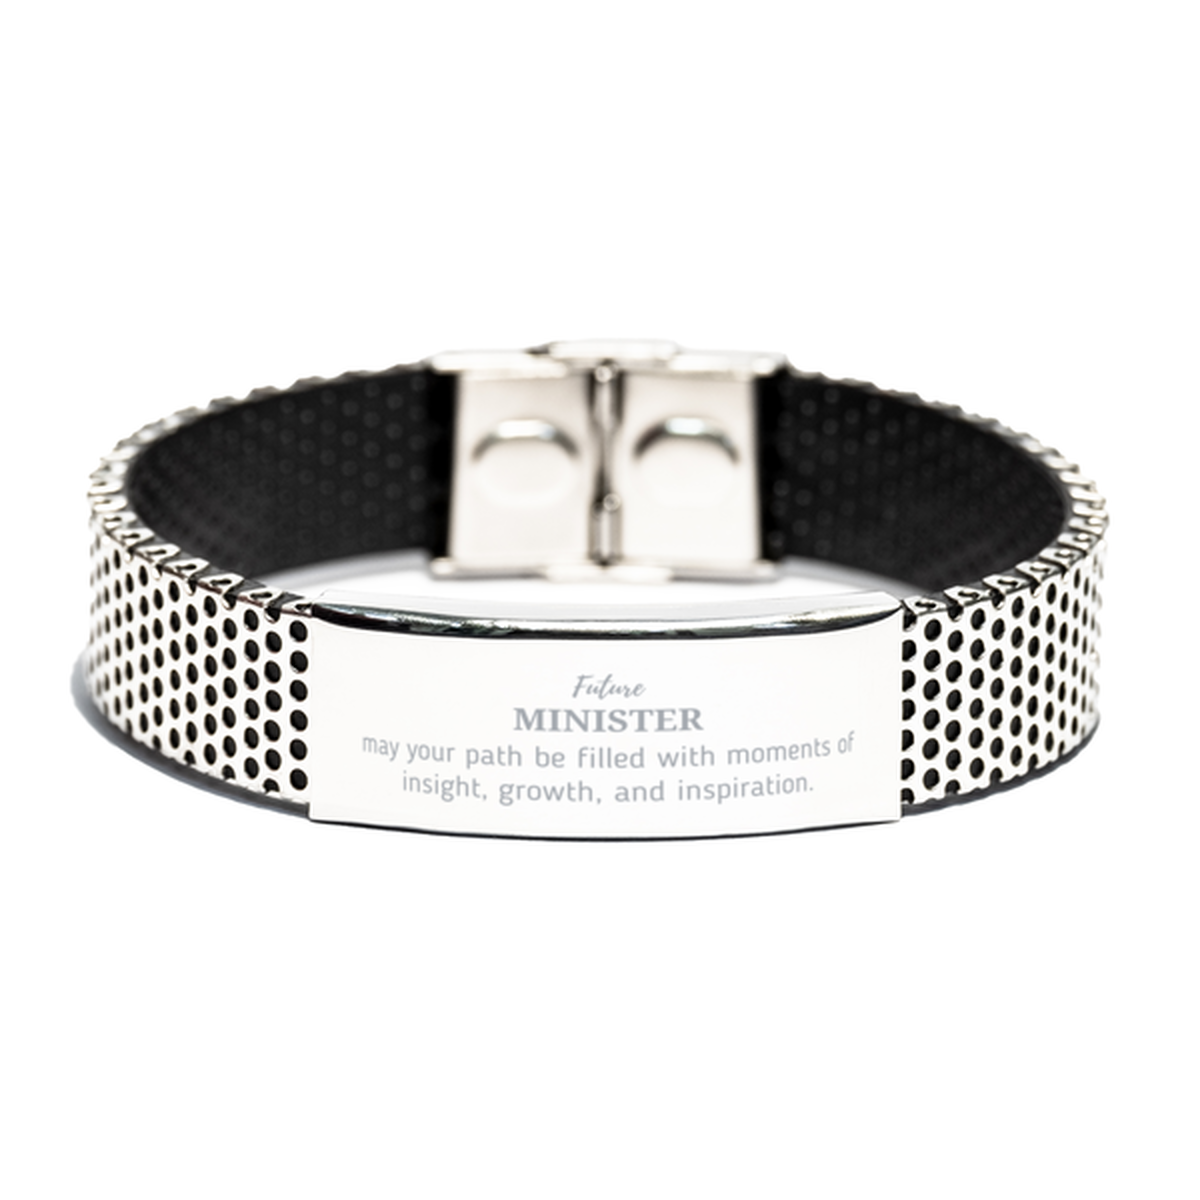 Future Minister Gifts, May your path be filled with moments of insight, Graduation Gifts for New Minister, Christmas Unique Stainless Steel Bracelet For Men, Women, Friends